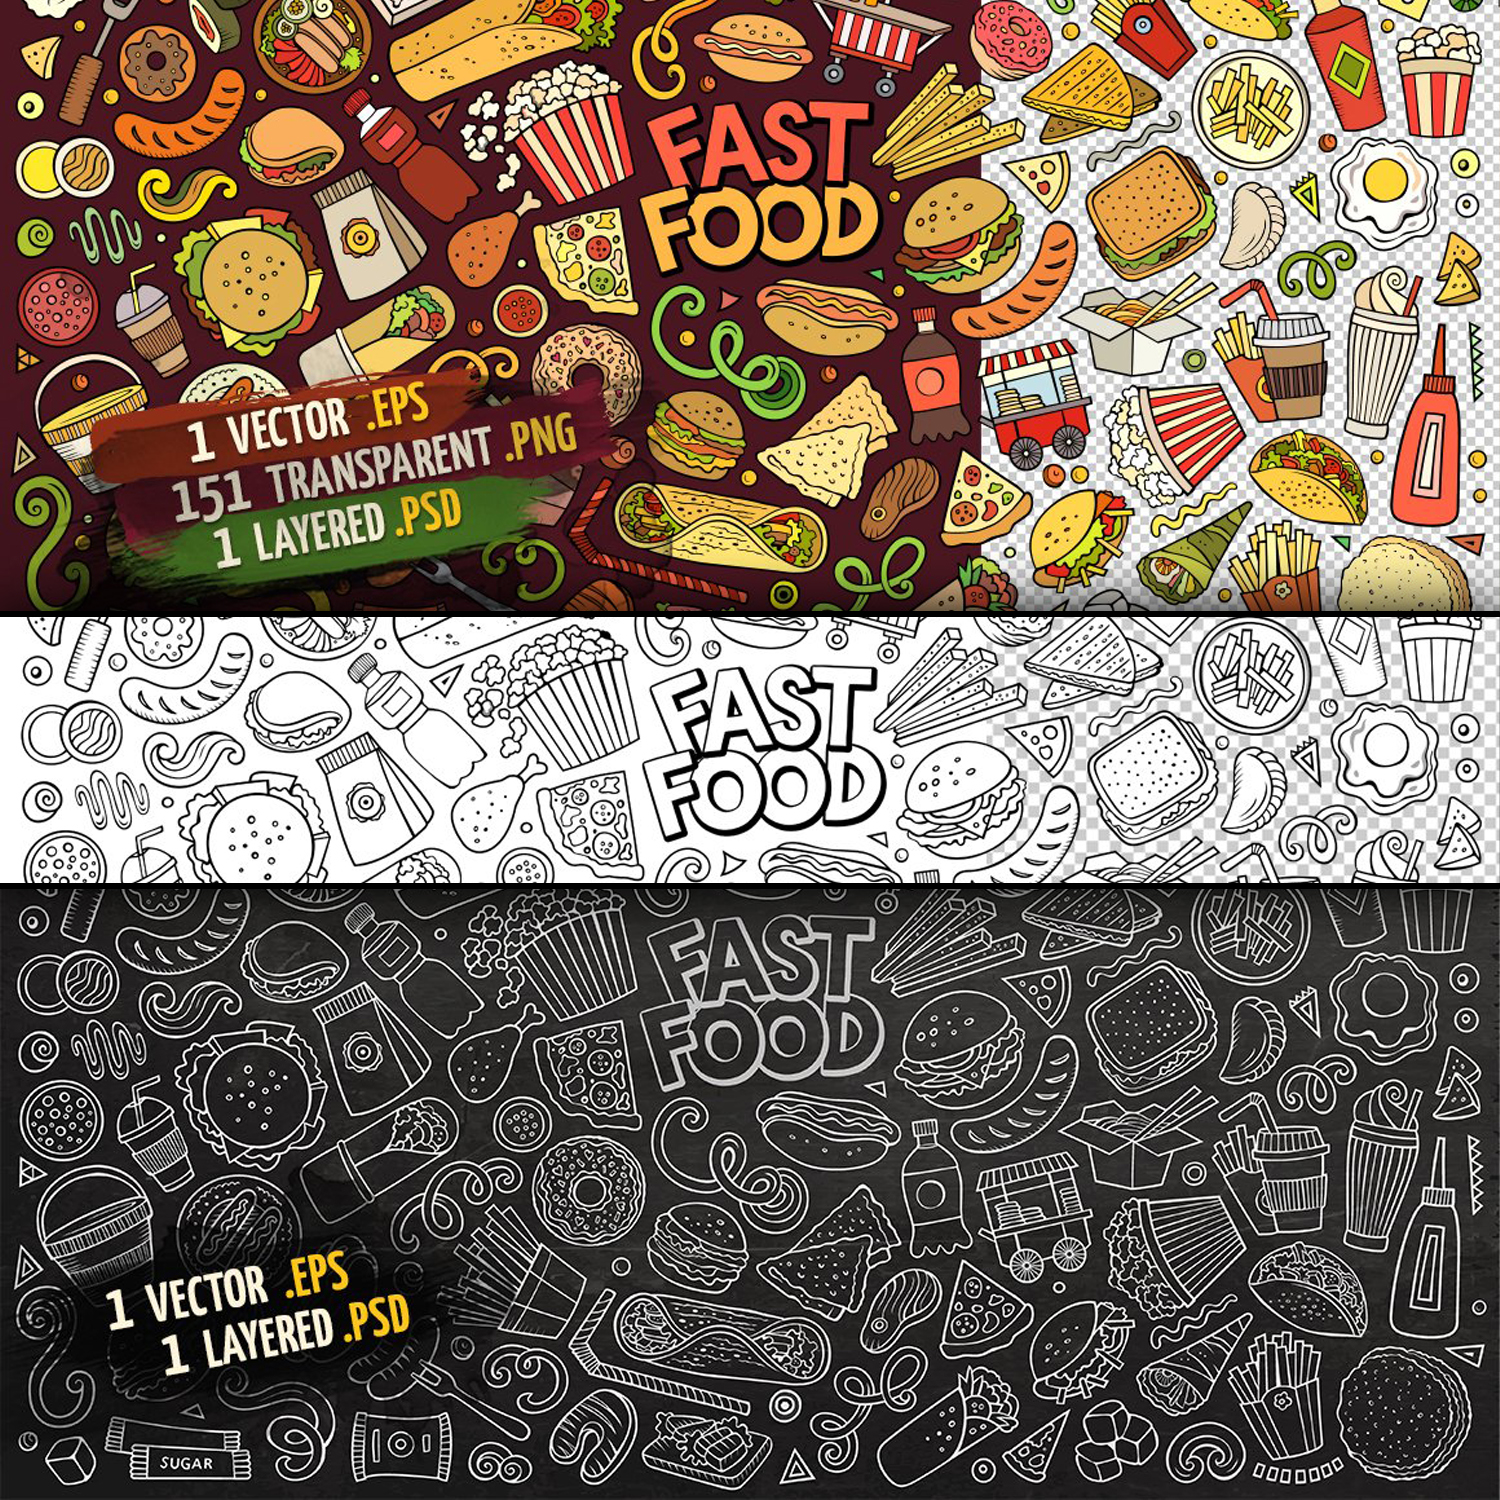 Fast food in the image in the style of three species.